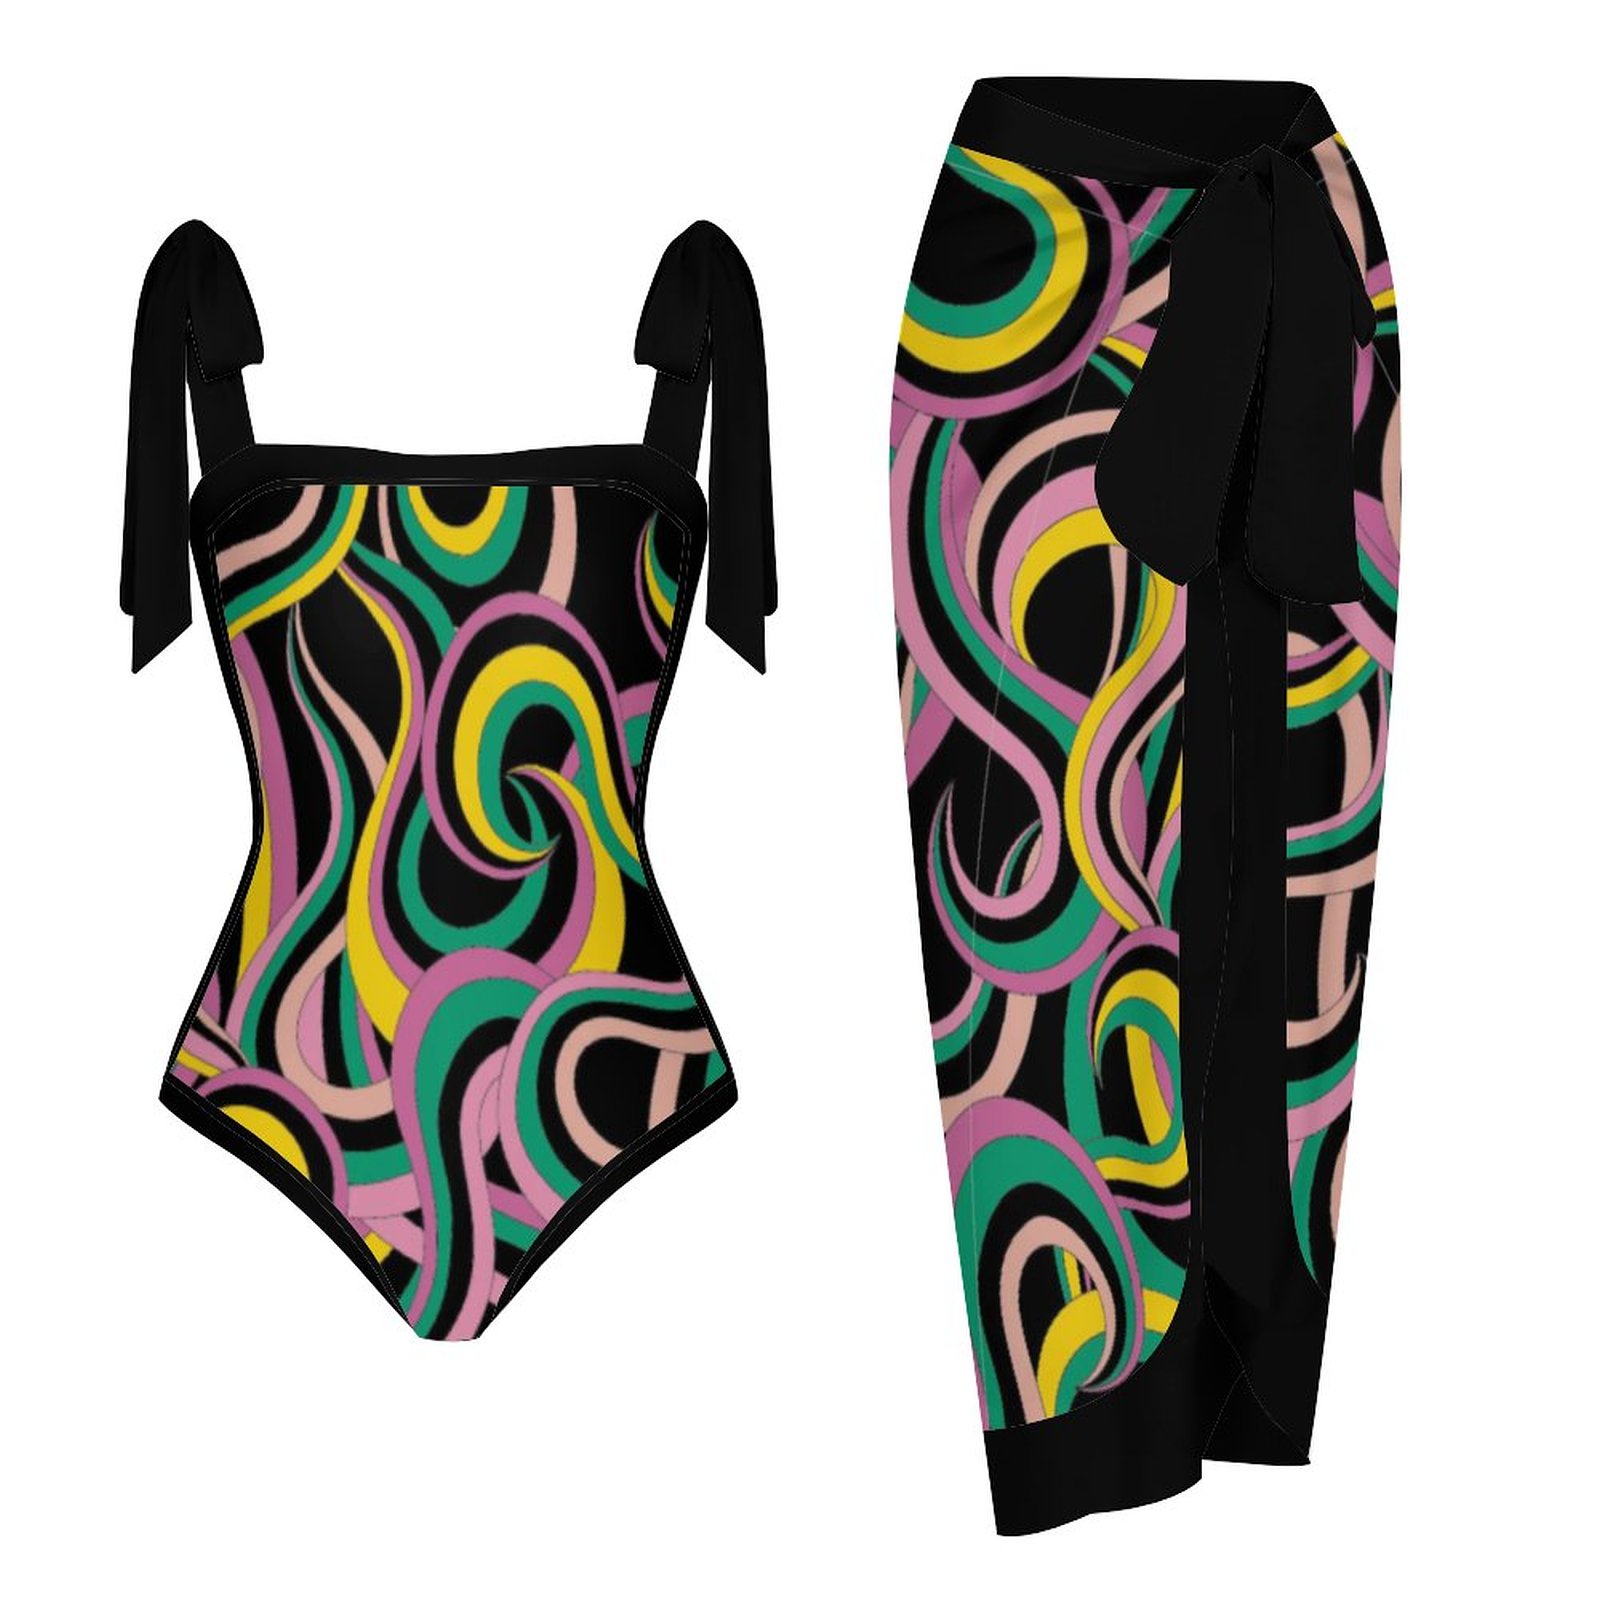 Fashion Geometric Printed One Piece Swimsuit And Cover Up